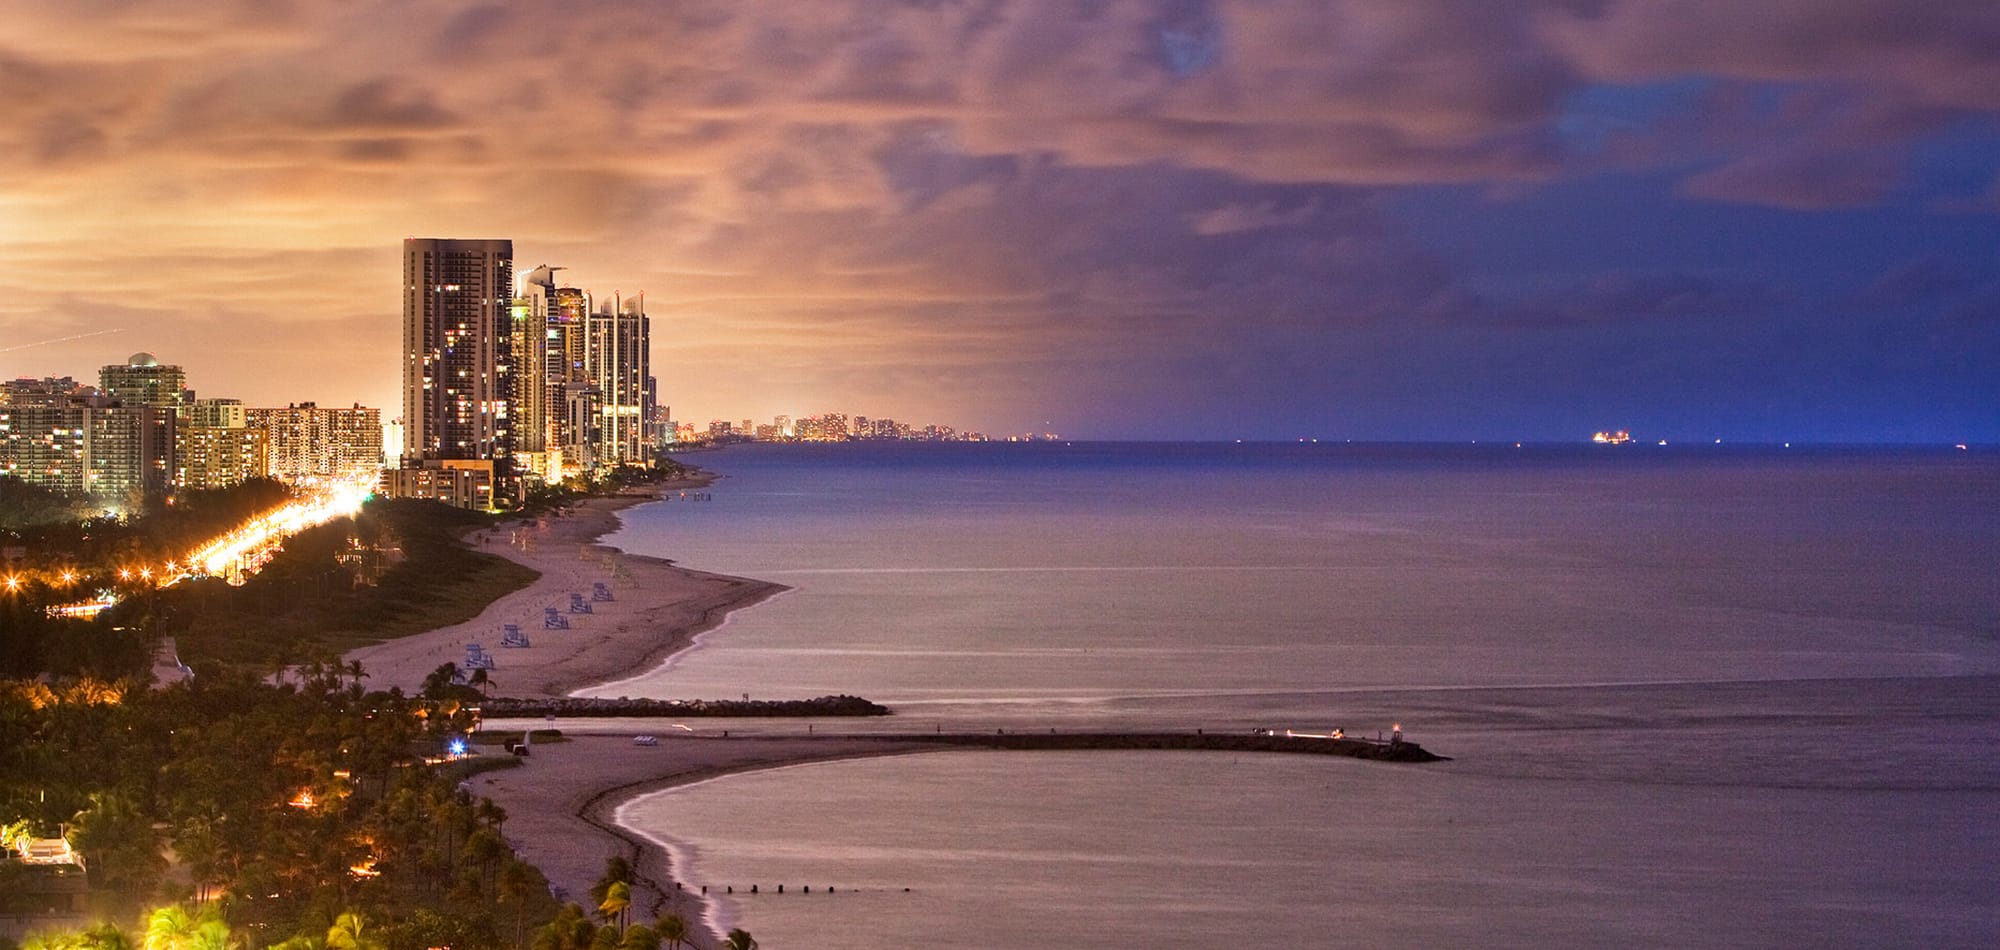 A sunset over Bal Harbour